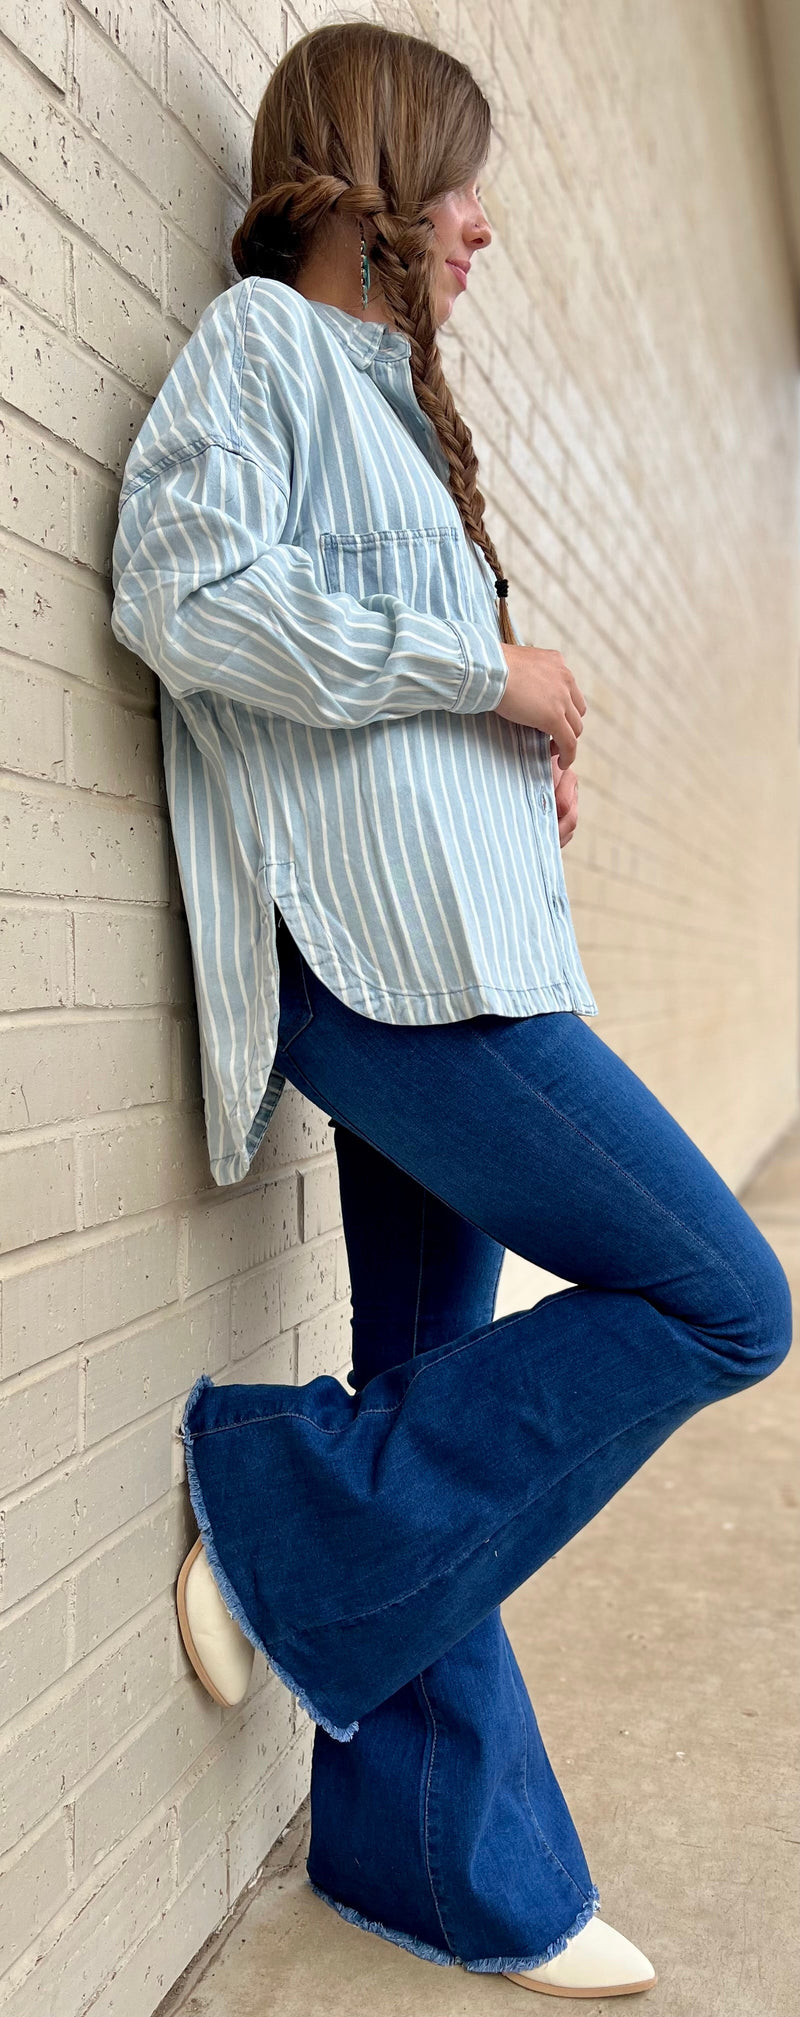 Denim top. Striped denim top. Button up denim top. Vintage top. Vintage inspired top. Vintage western top. Old school western top. Women's button up. Women's western style. Women's western top. Women's western boutique. Women's boutique. Western boutique. Rodeo outfits. Small business. Online boutique. 